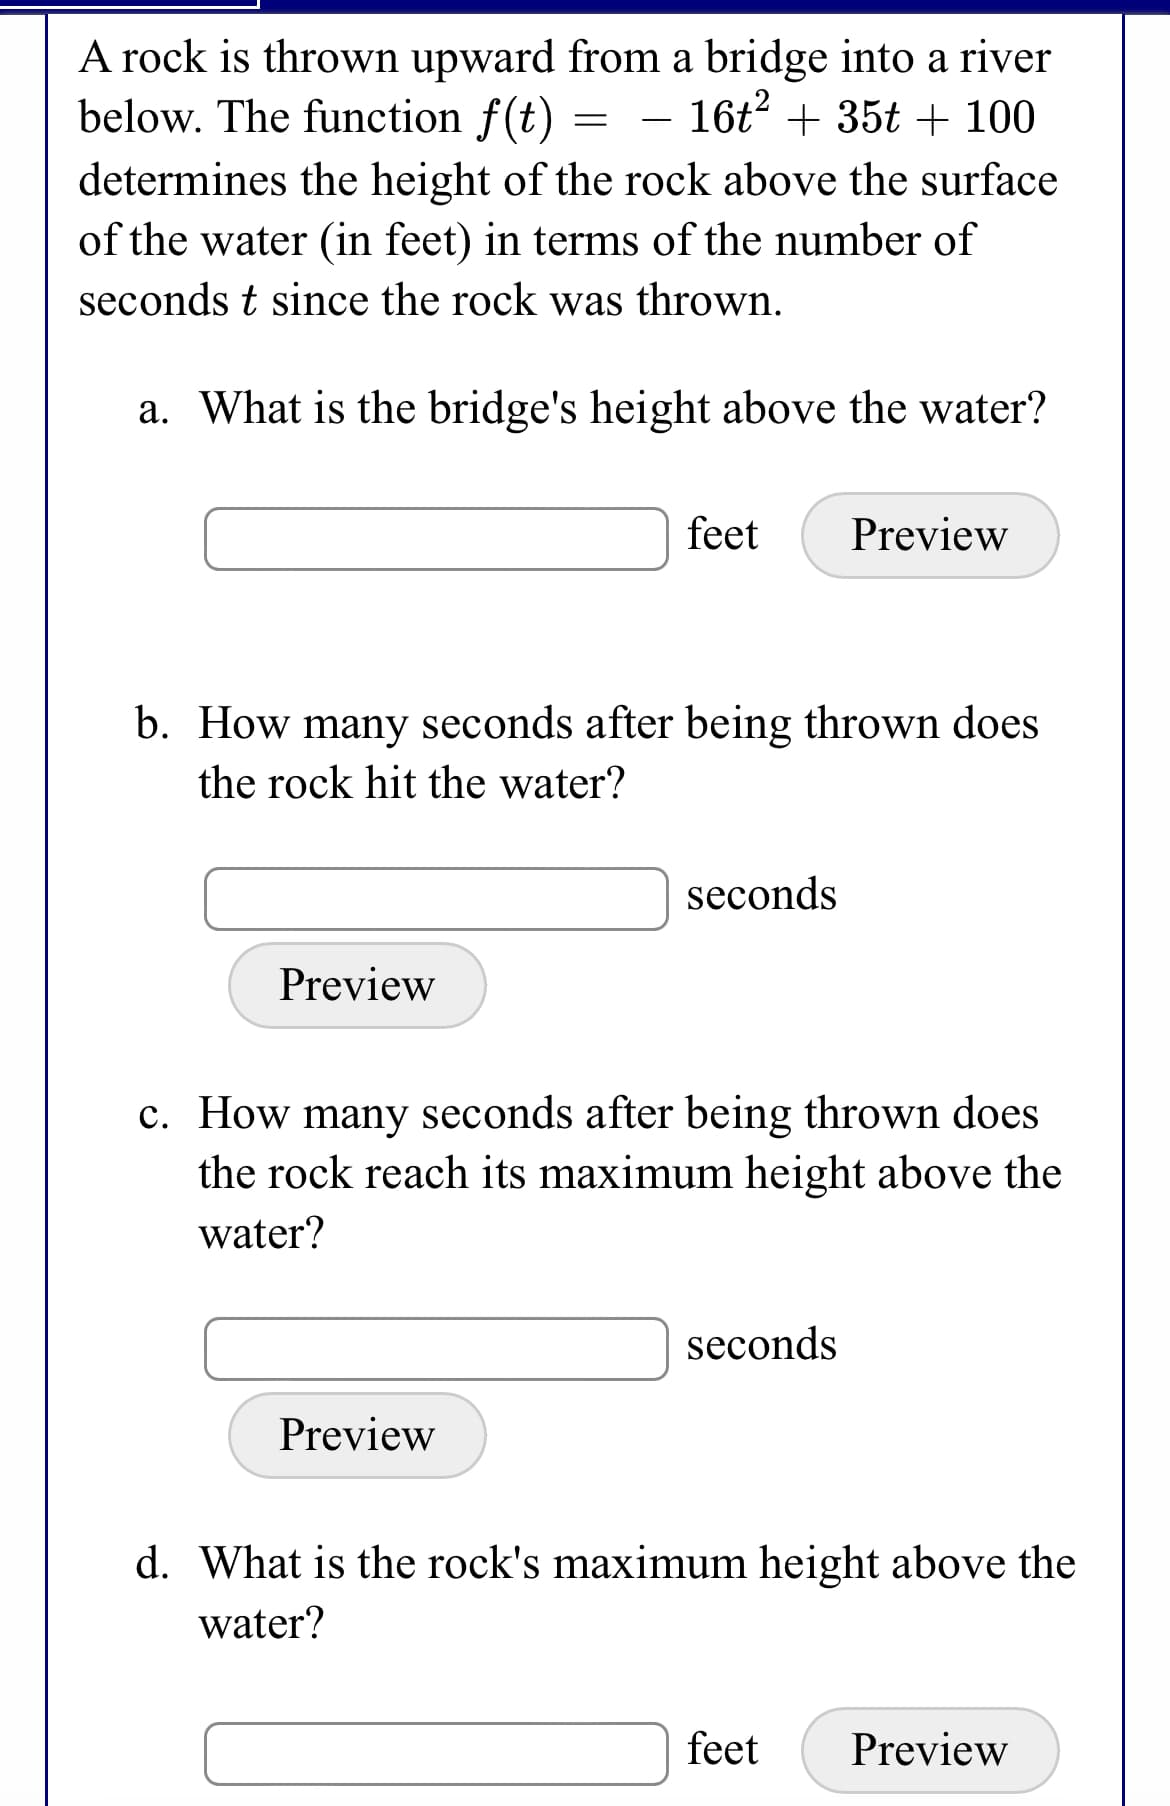 A rock is thrown upward from a bridge into a river
below. The function f(t)
16t + 35t + 100
-
determines the height of the rock above the surface
of the water (in feet) in terms of the number of
seconds t since the rock was thrown.
a. What is the bridge's height above the water?
feet
Preview
b. How many seconds after being thrown does
the rock hit the water?
seconds
Preview
c. How many seconds after being thrown does
the rock reach its maximum height above the
water?
seconds
Preview
d. What is the rock's maximum height above the
water?
feet
Preview
